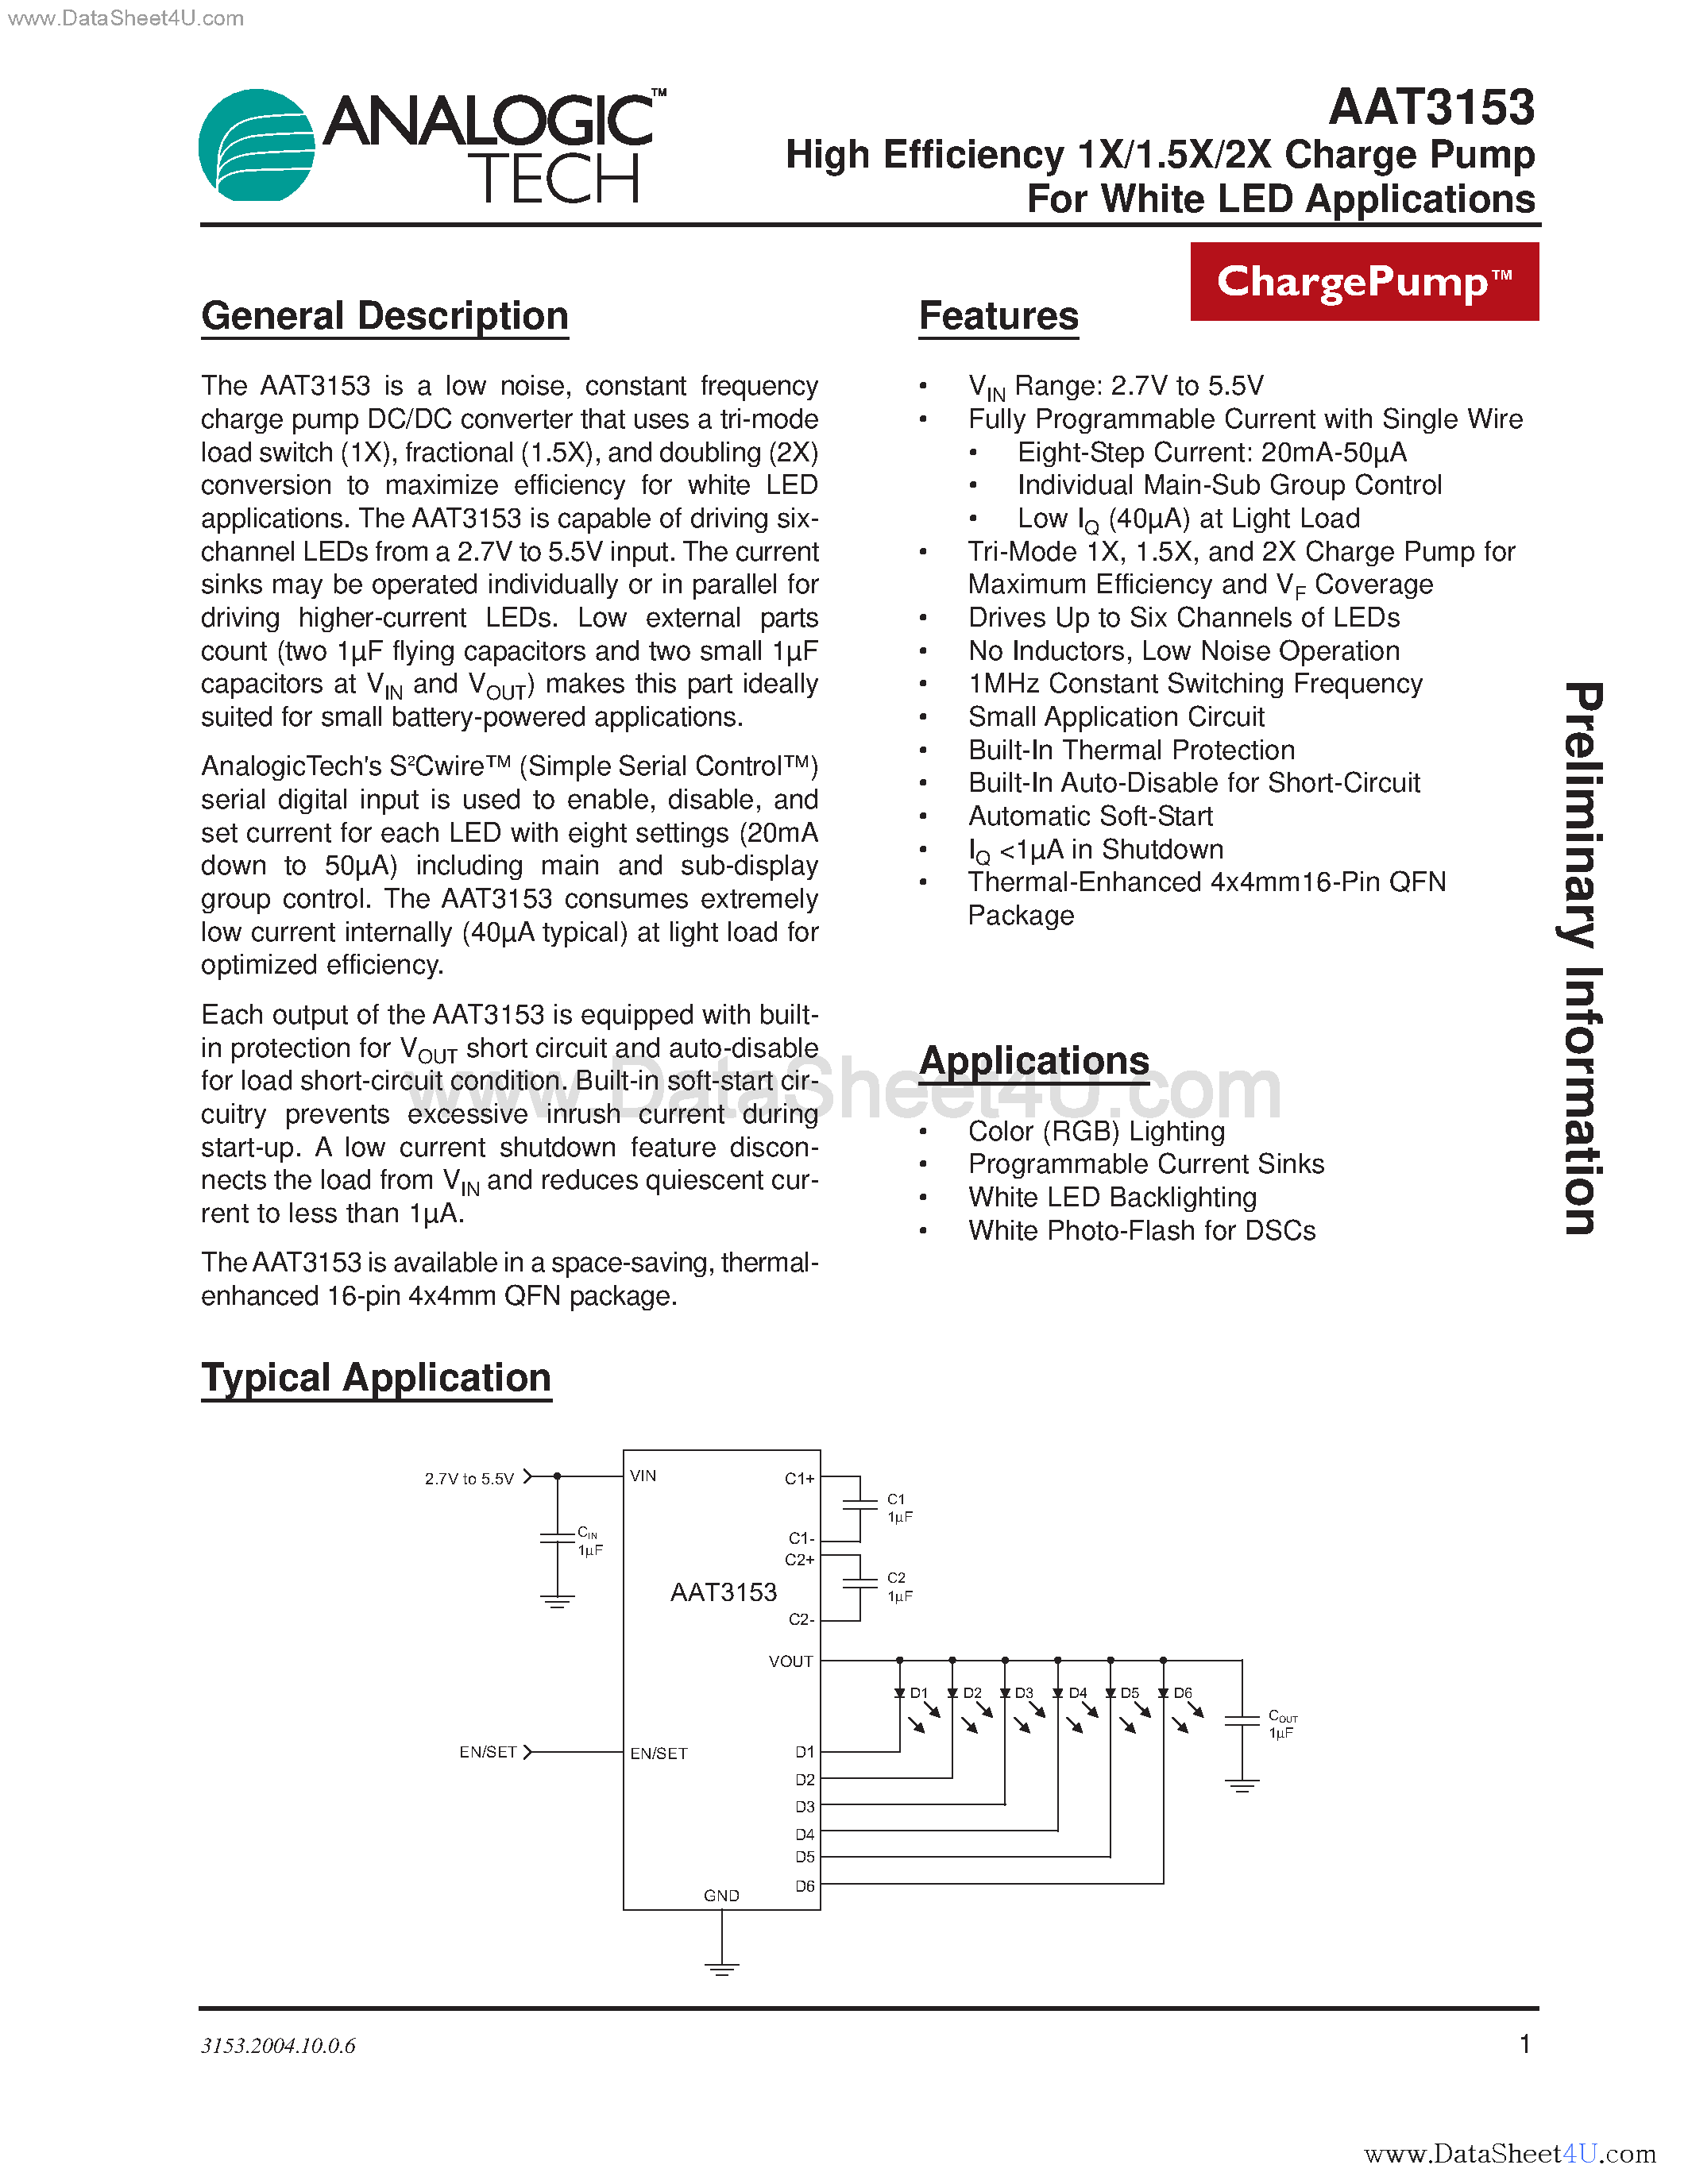 Datasheet AAT3153 - High Efficiency 1X/1.5X/2X Charge Pump For White LED Applications page 1